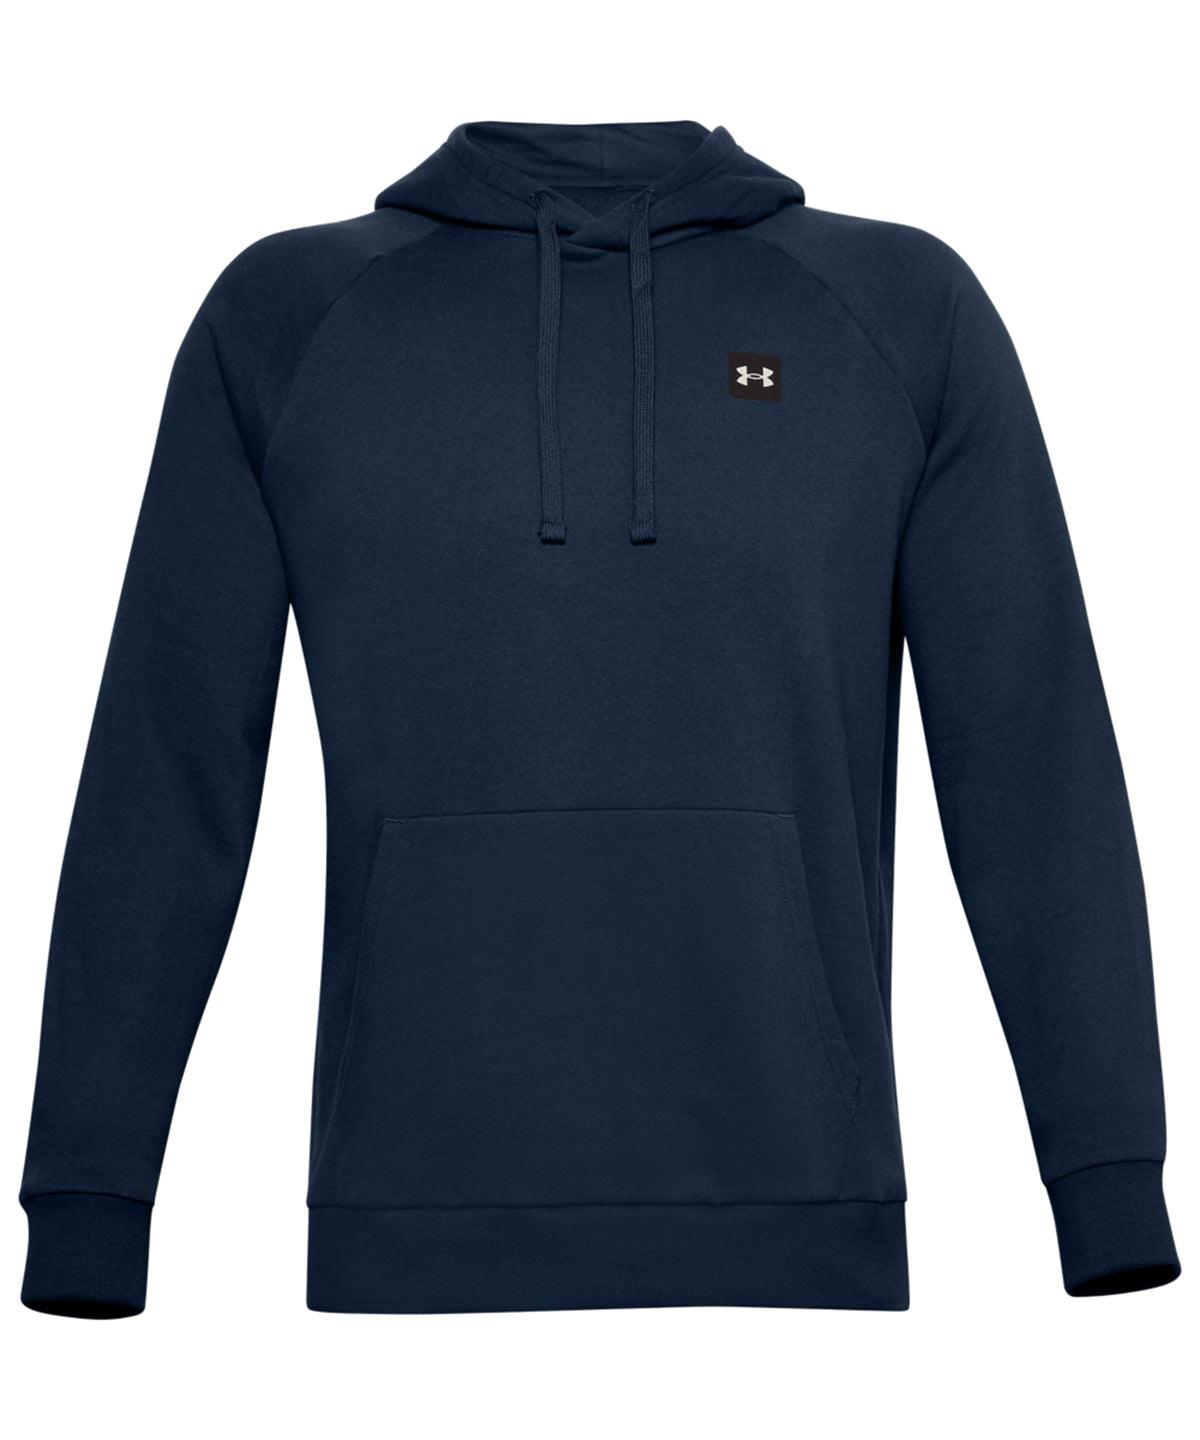 Academy/Onyx White - Rival fleece hoodie Hoodies Under Armour Activewear & Performance, Back to the Gym, Exclusives, Gifting, Gymwear, Hoodies, Must Haves, New Colours For 2022, New Sizes for 2021, Outdoor Sports, Plus Sizes, Premium, Premium Sports, Sports & Leisure Schoolwear Centres